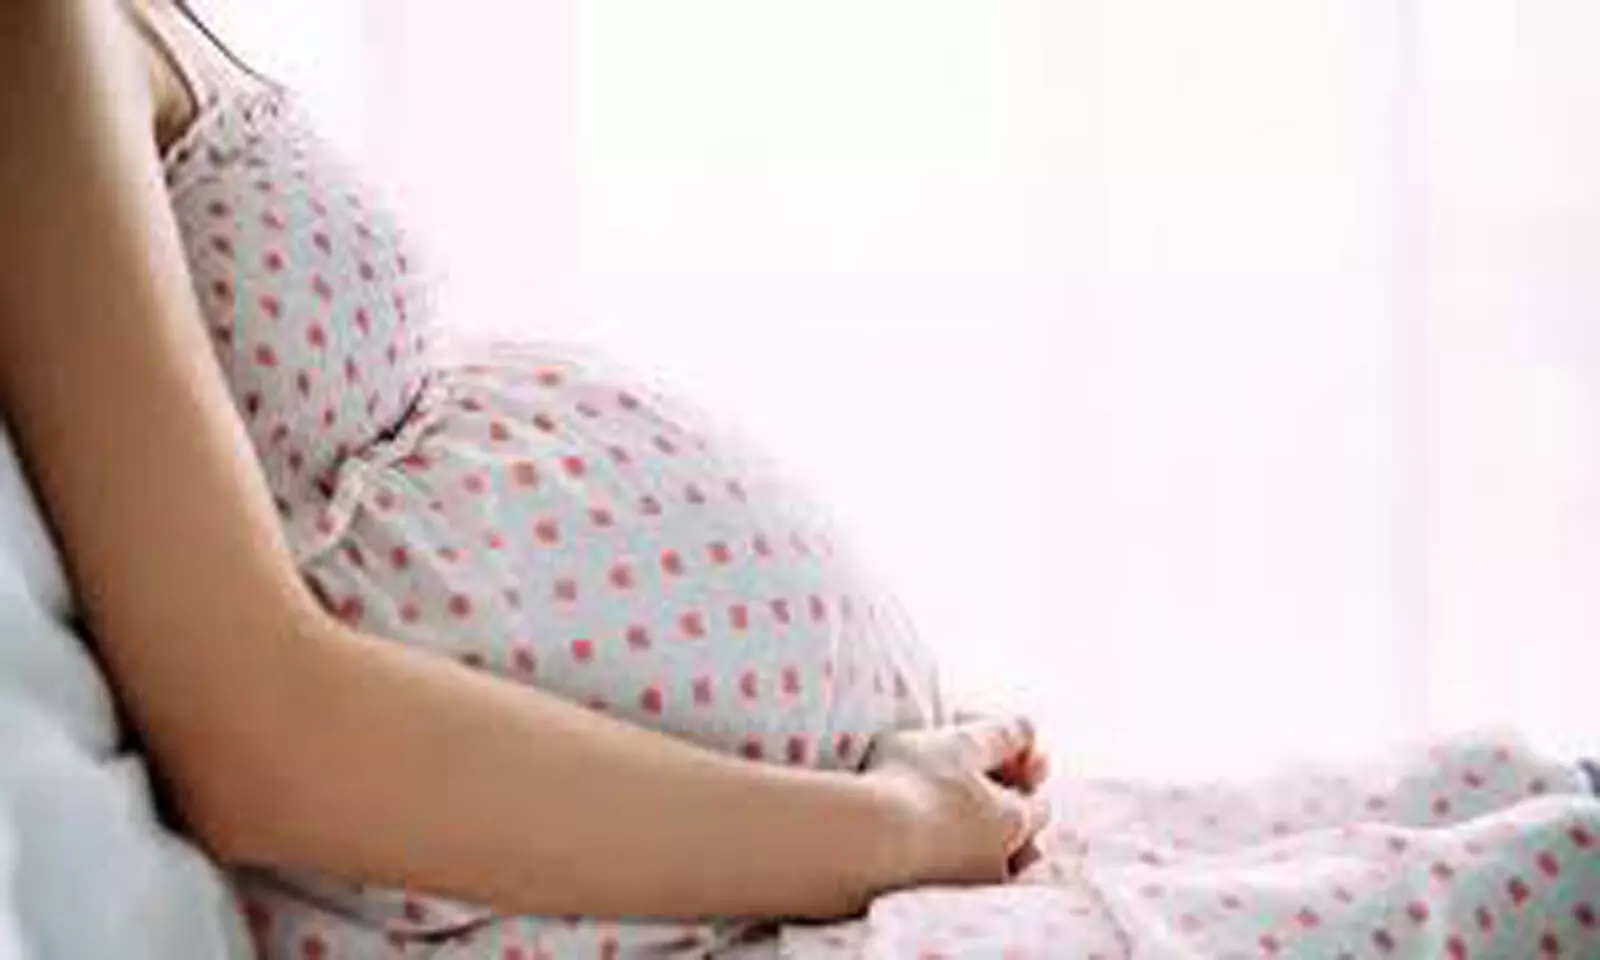 Repeated pregnancy loss may be tied to chemical communication